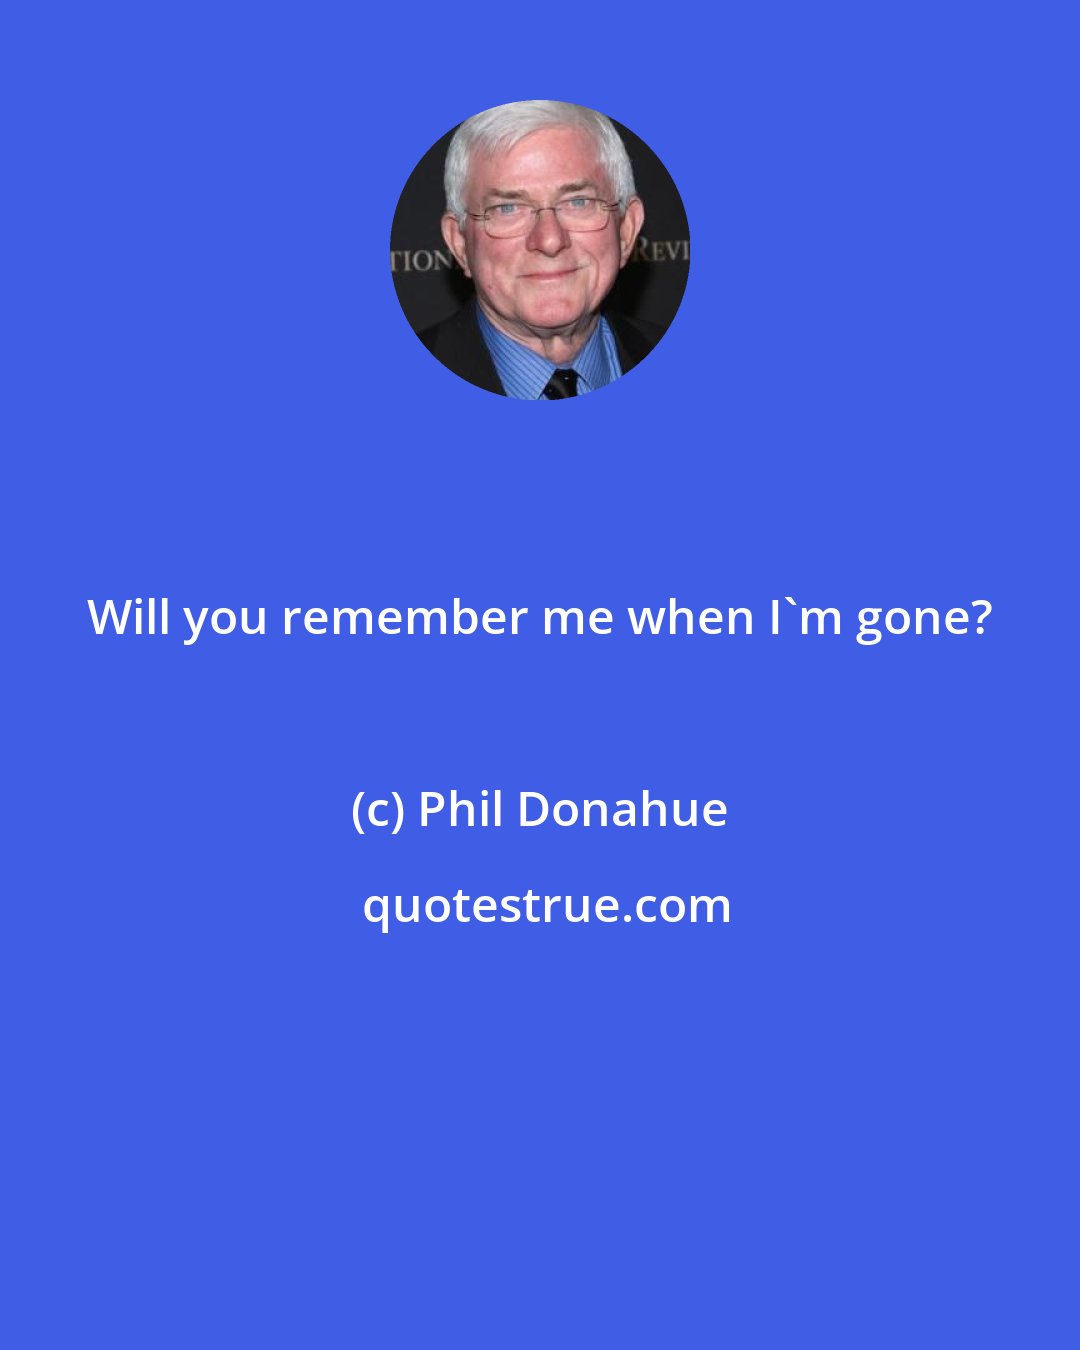 Phil Donahue: Will you remember me when I'm gone?